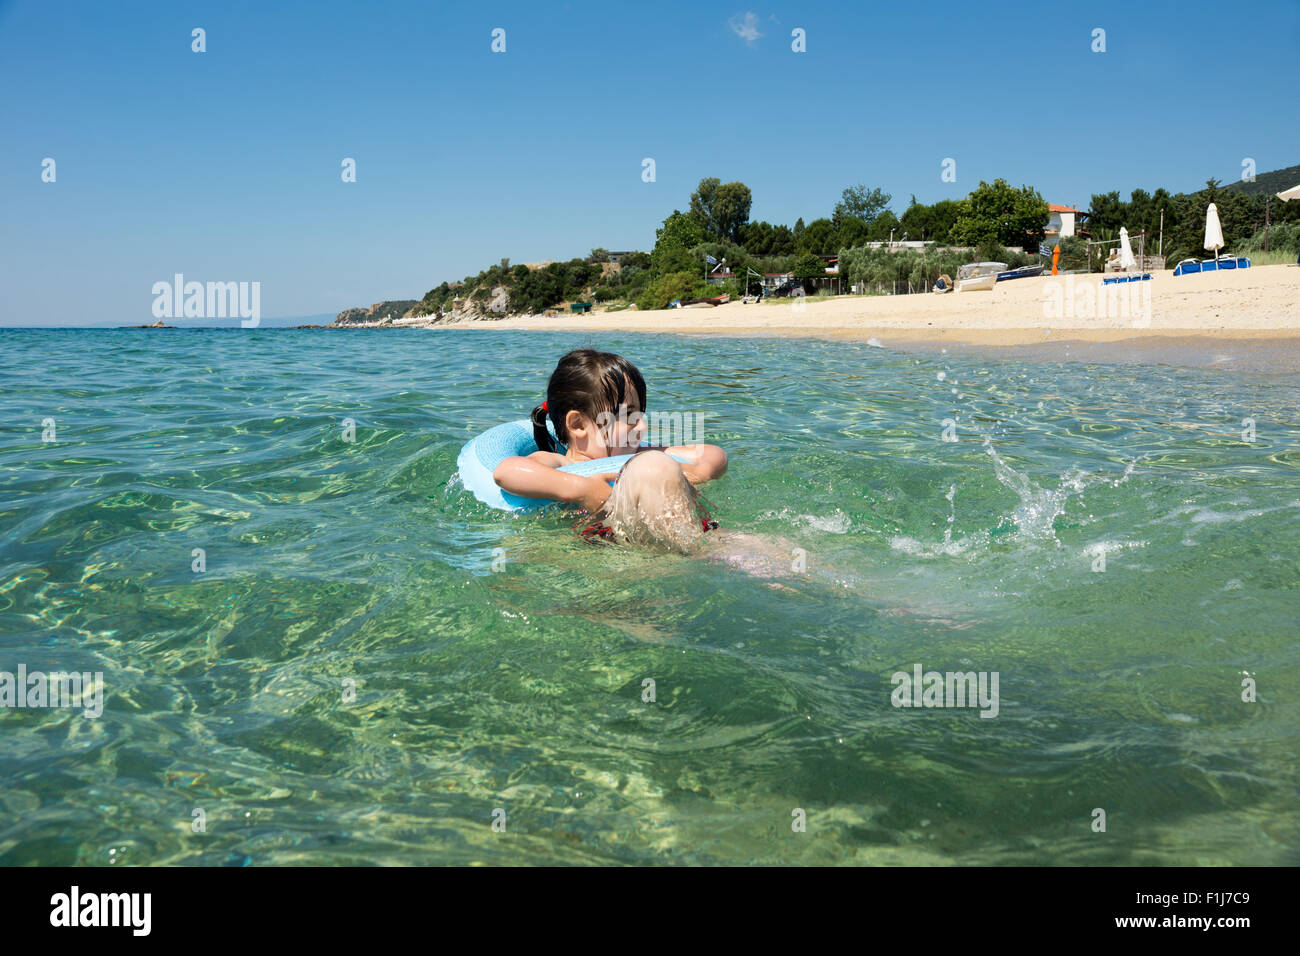 Child with floating ring having fun in the sea Stock Photo